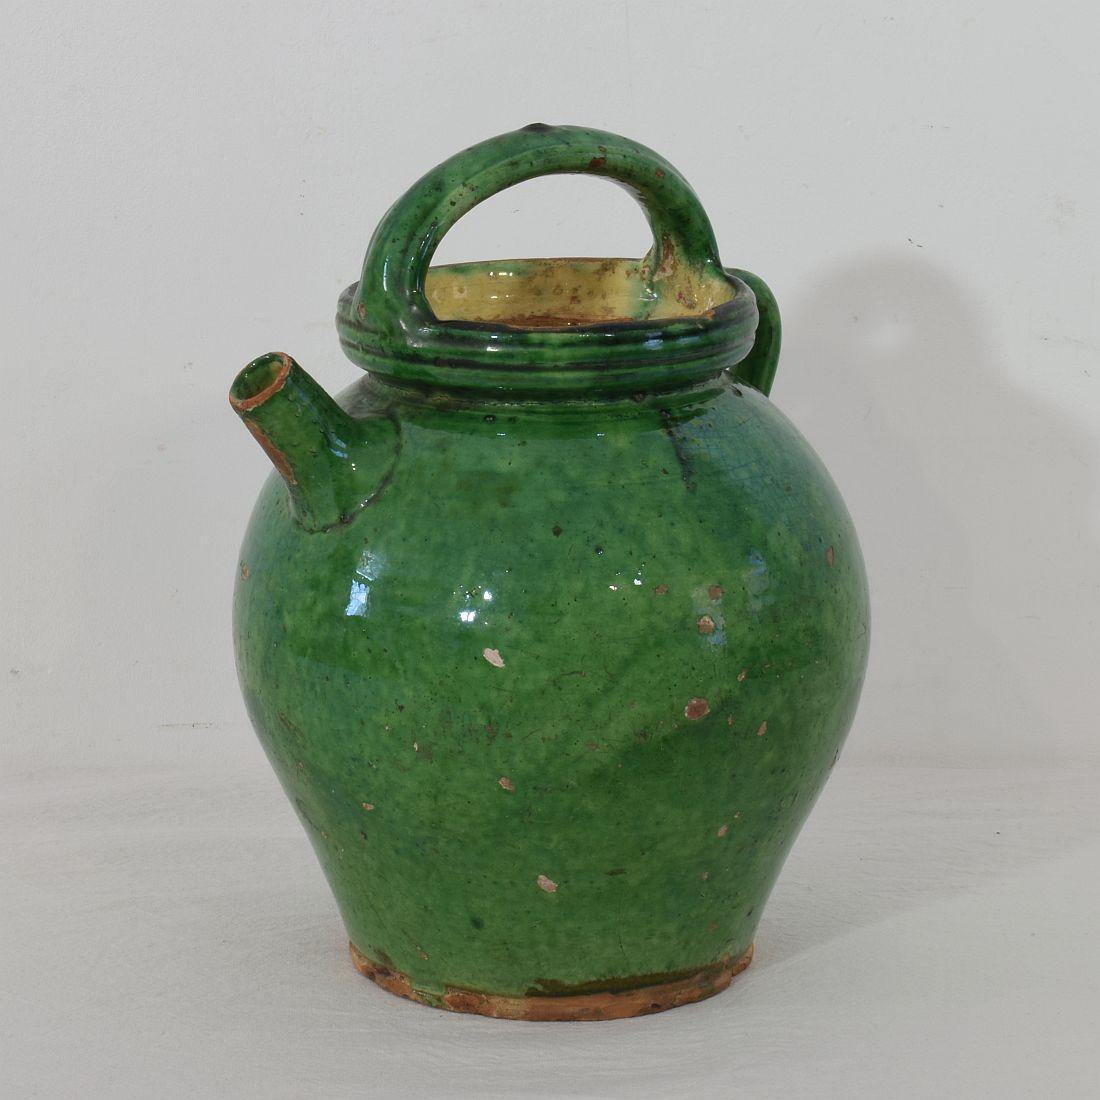 Great authentic piece of pottery from the Provence. Unique and rare glaze. Beautiful weathered. Chips and imperfections help authenticate this water cruche as it was an utilitarian type piece.
France, circa 1850-1900
Good condition.